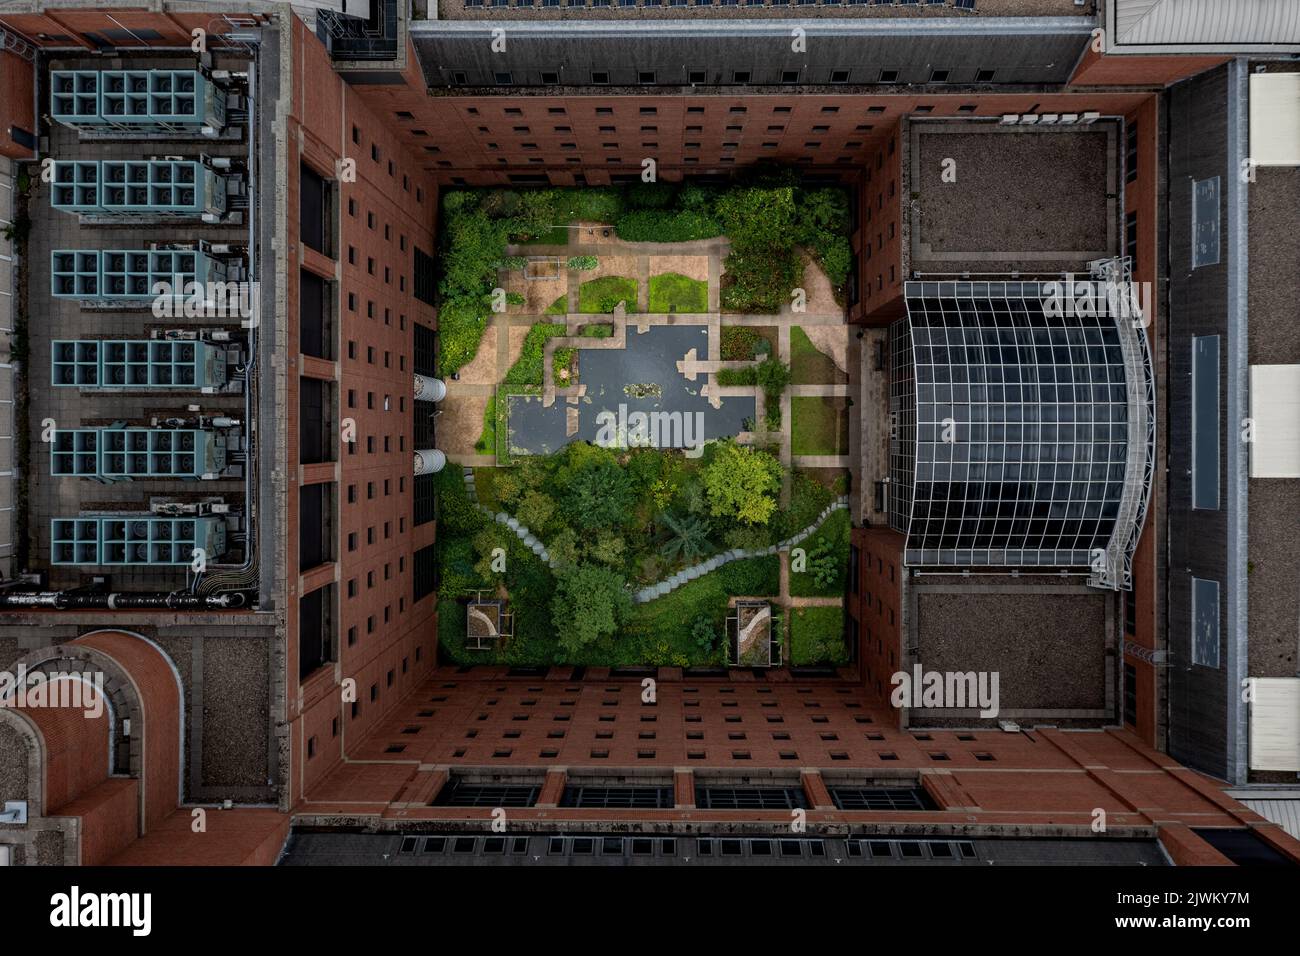 An aerial view directly above a secluded inner courtyard garden in the centre of a city apartment block surrounded by red brick walls Stock Photo